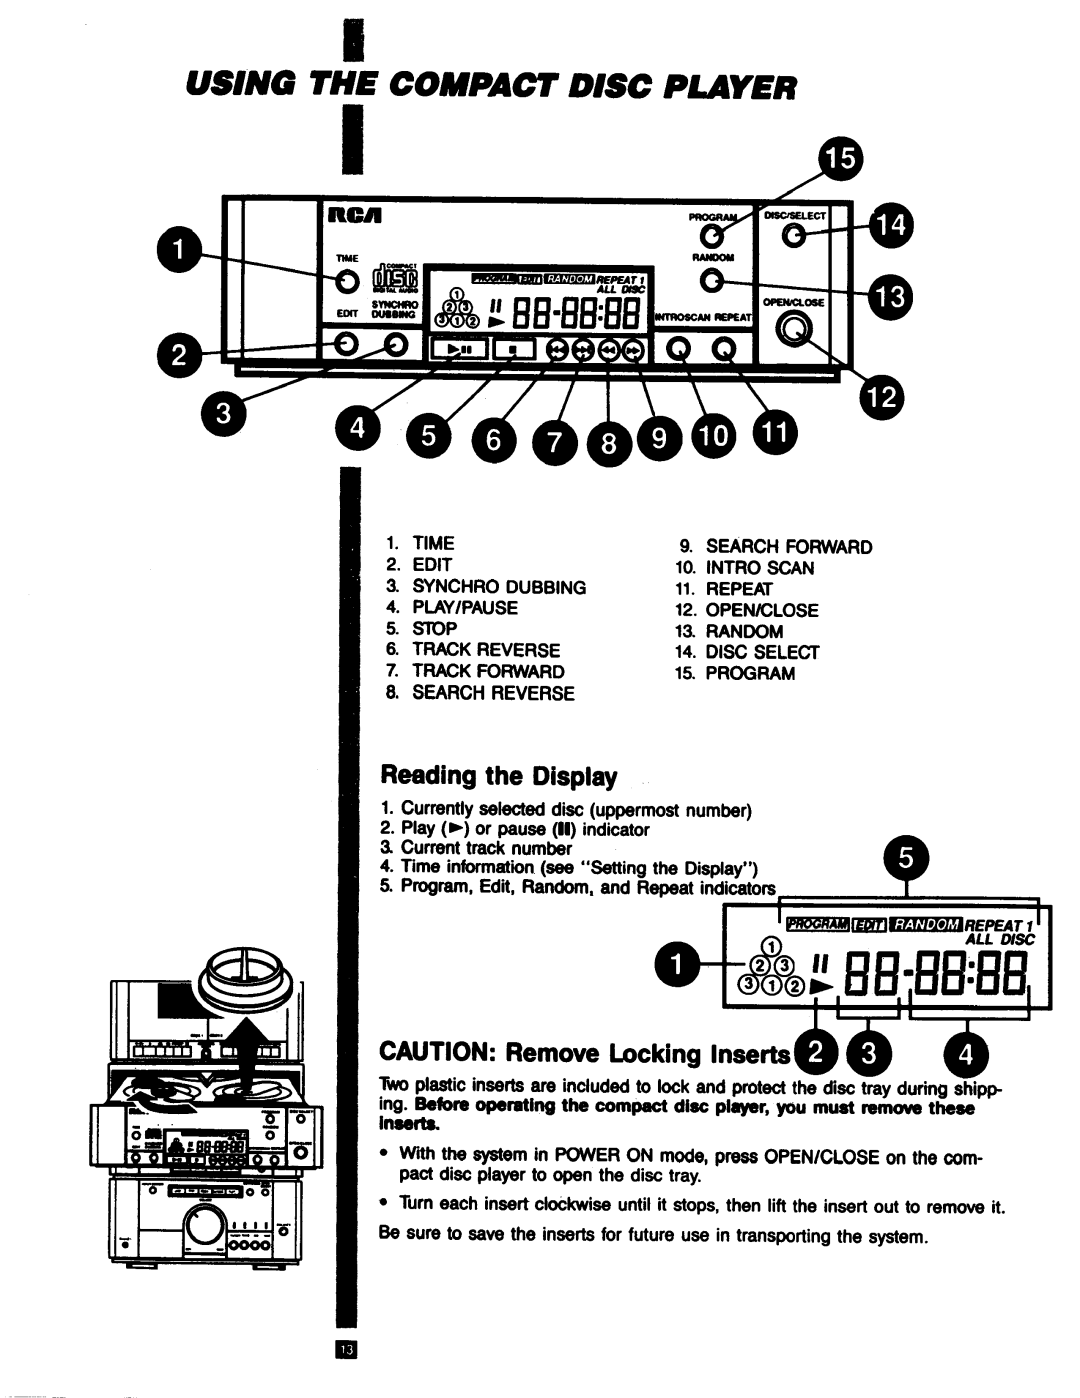 RCA RP-9753 manual Using The Compact Disc Player, Reading the Display, CAUTION Remove Locking Inserts 